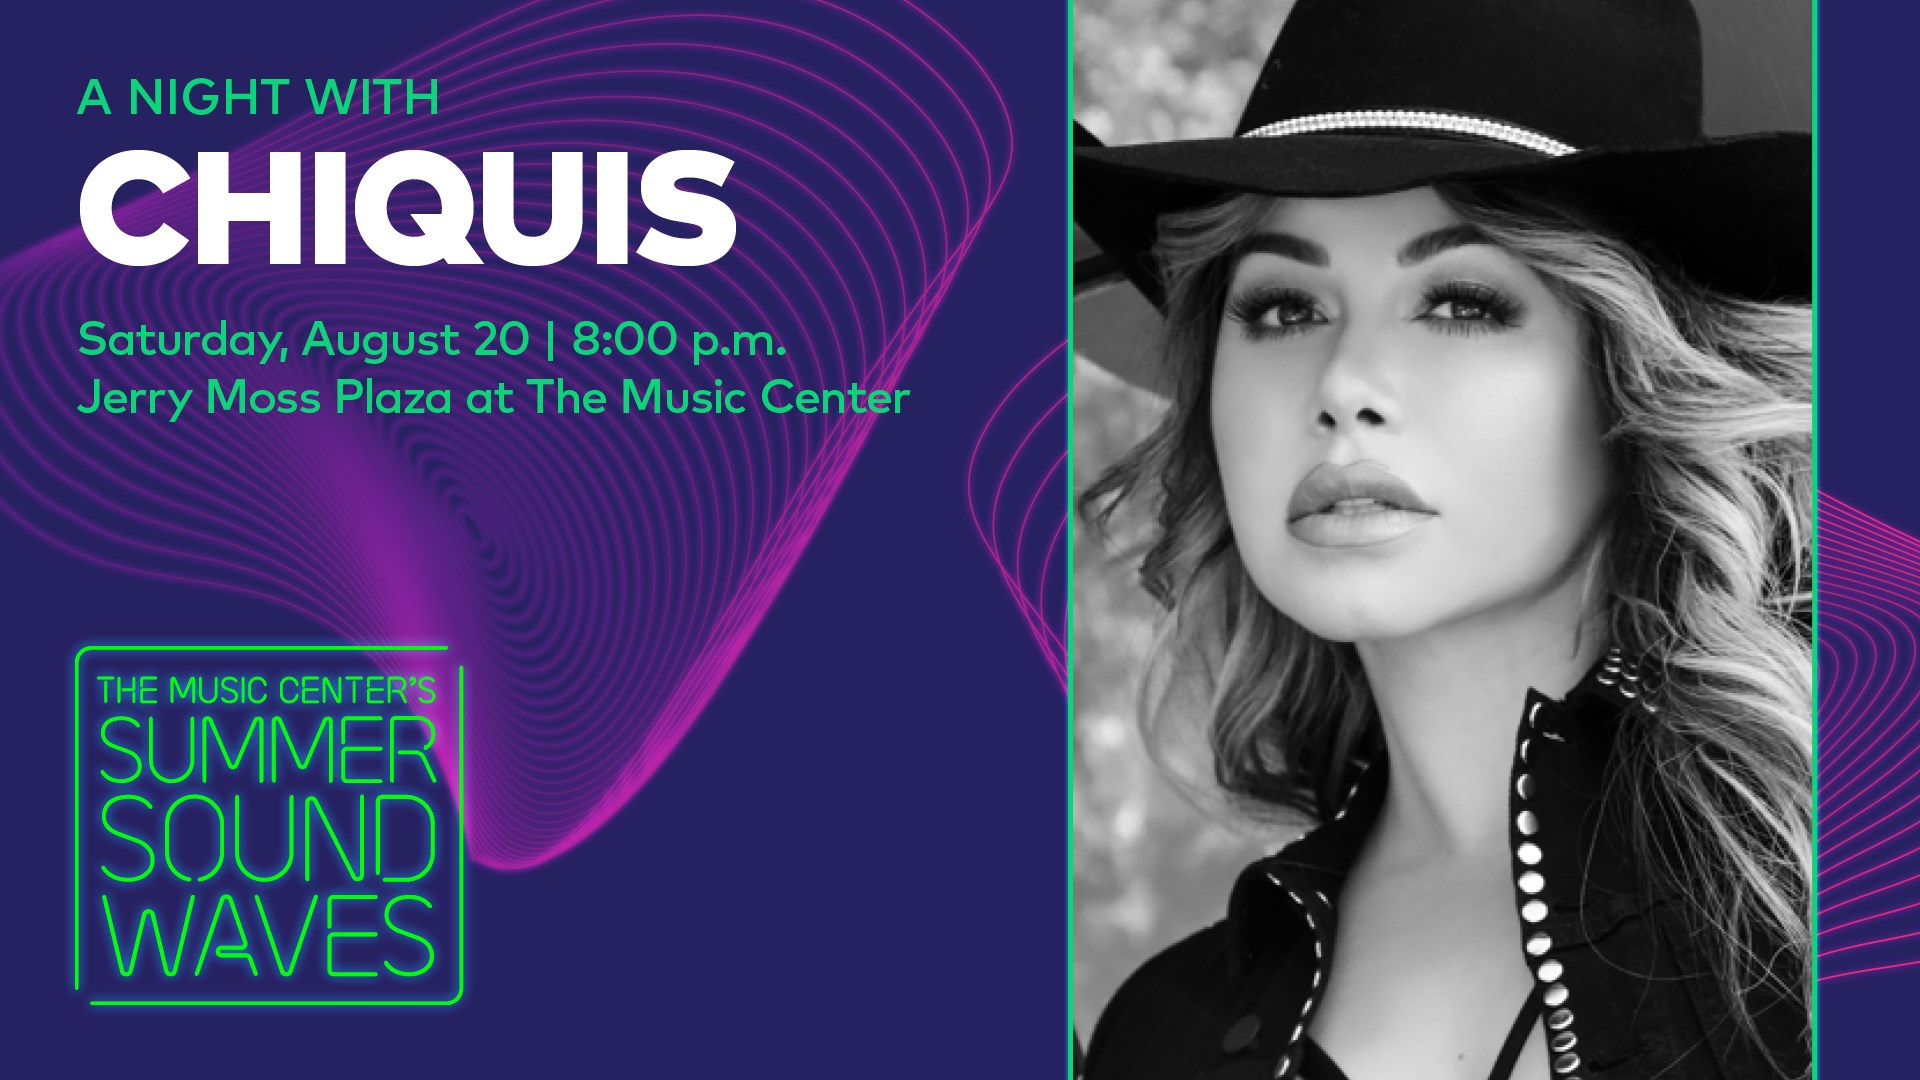 The Music Center's Summer SoundWaves featuring Chiquis